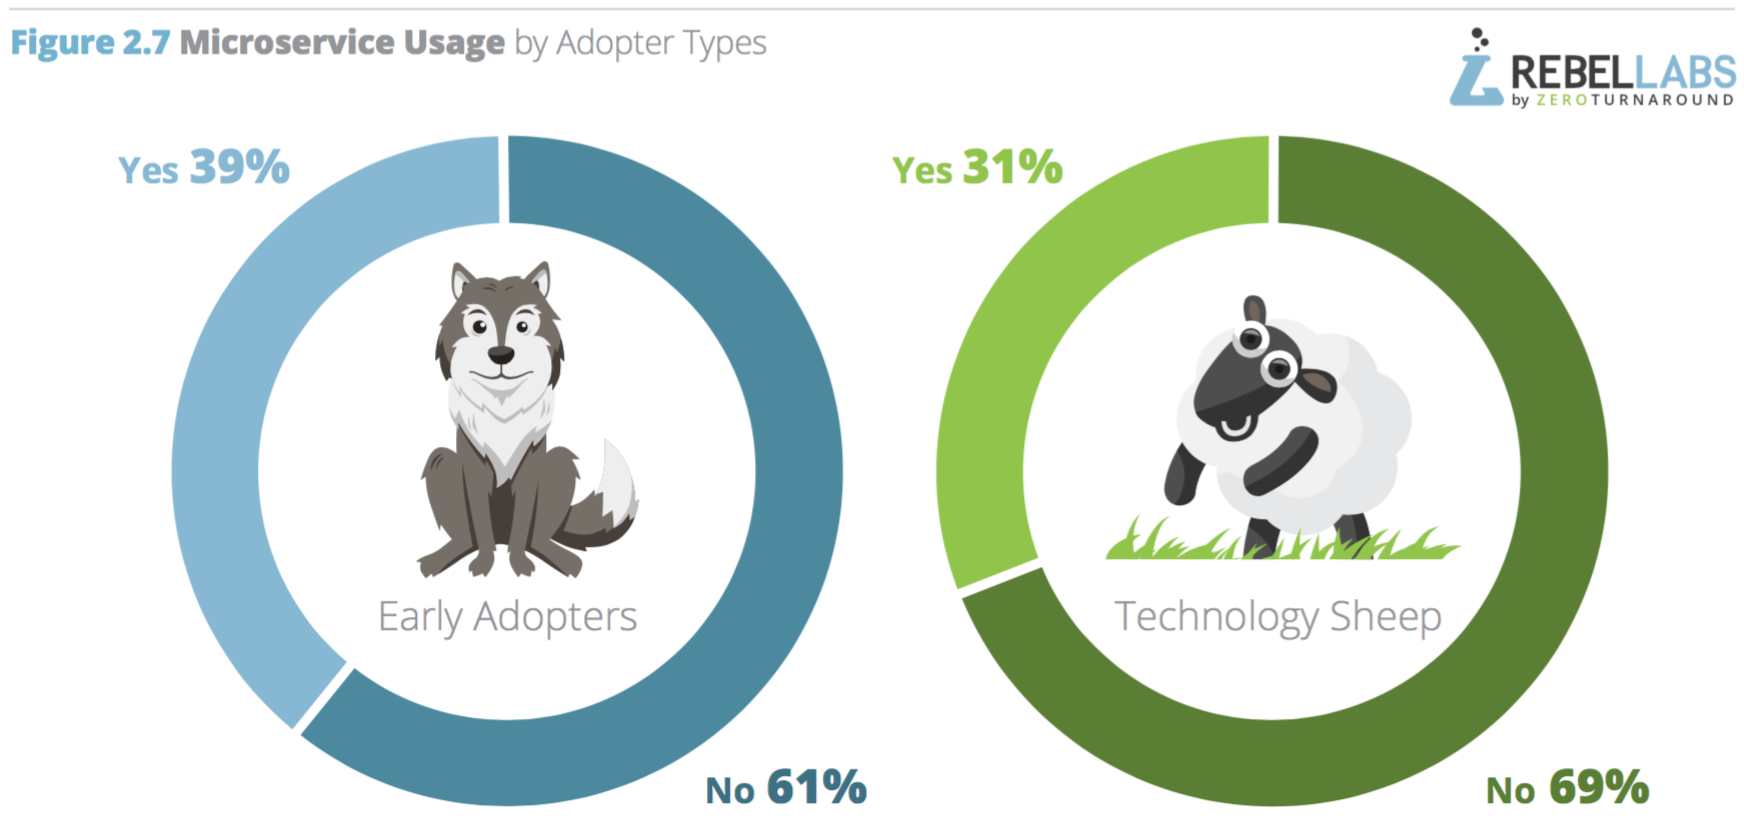 pie charts showing microservices usage by adopter type